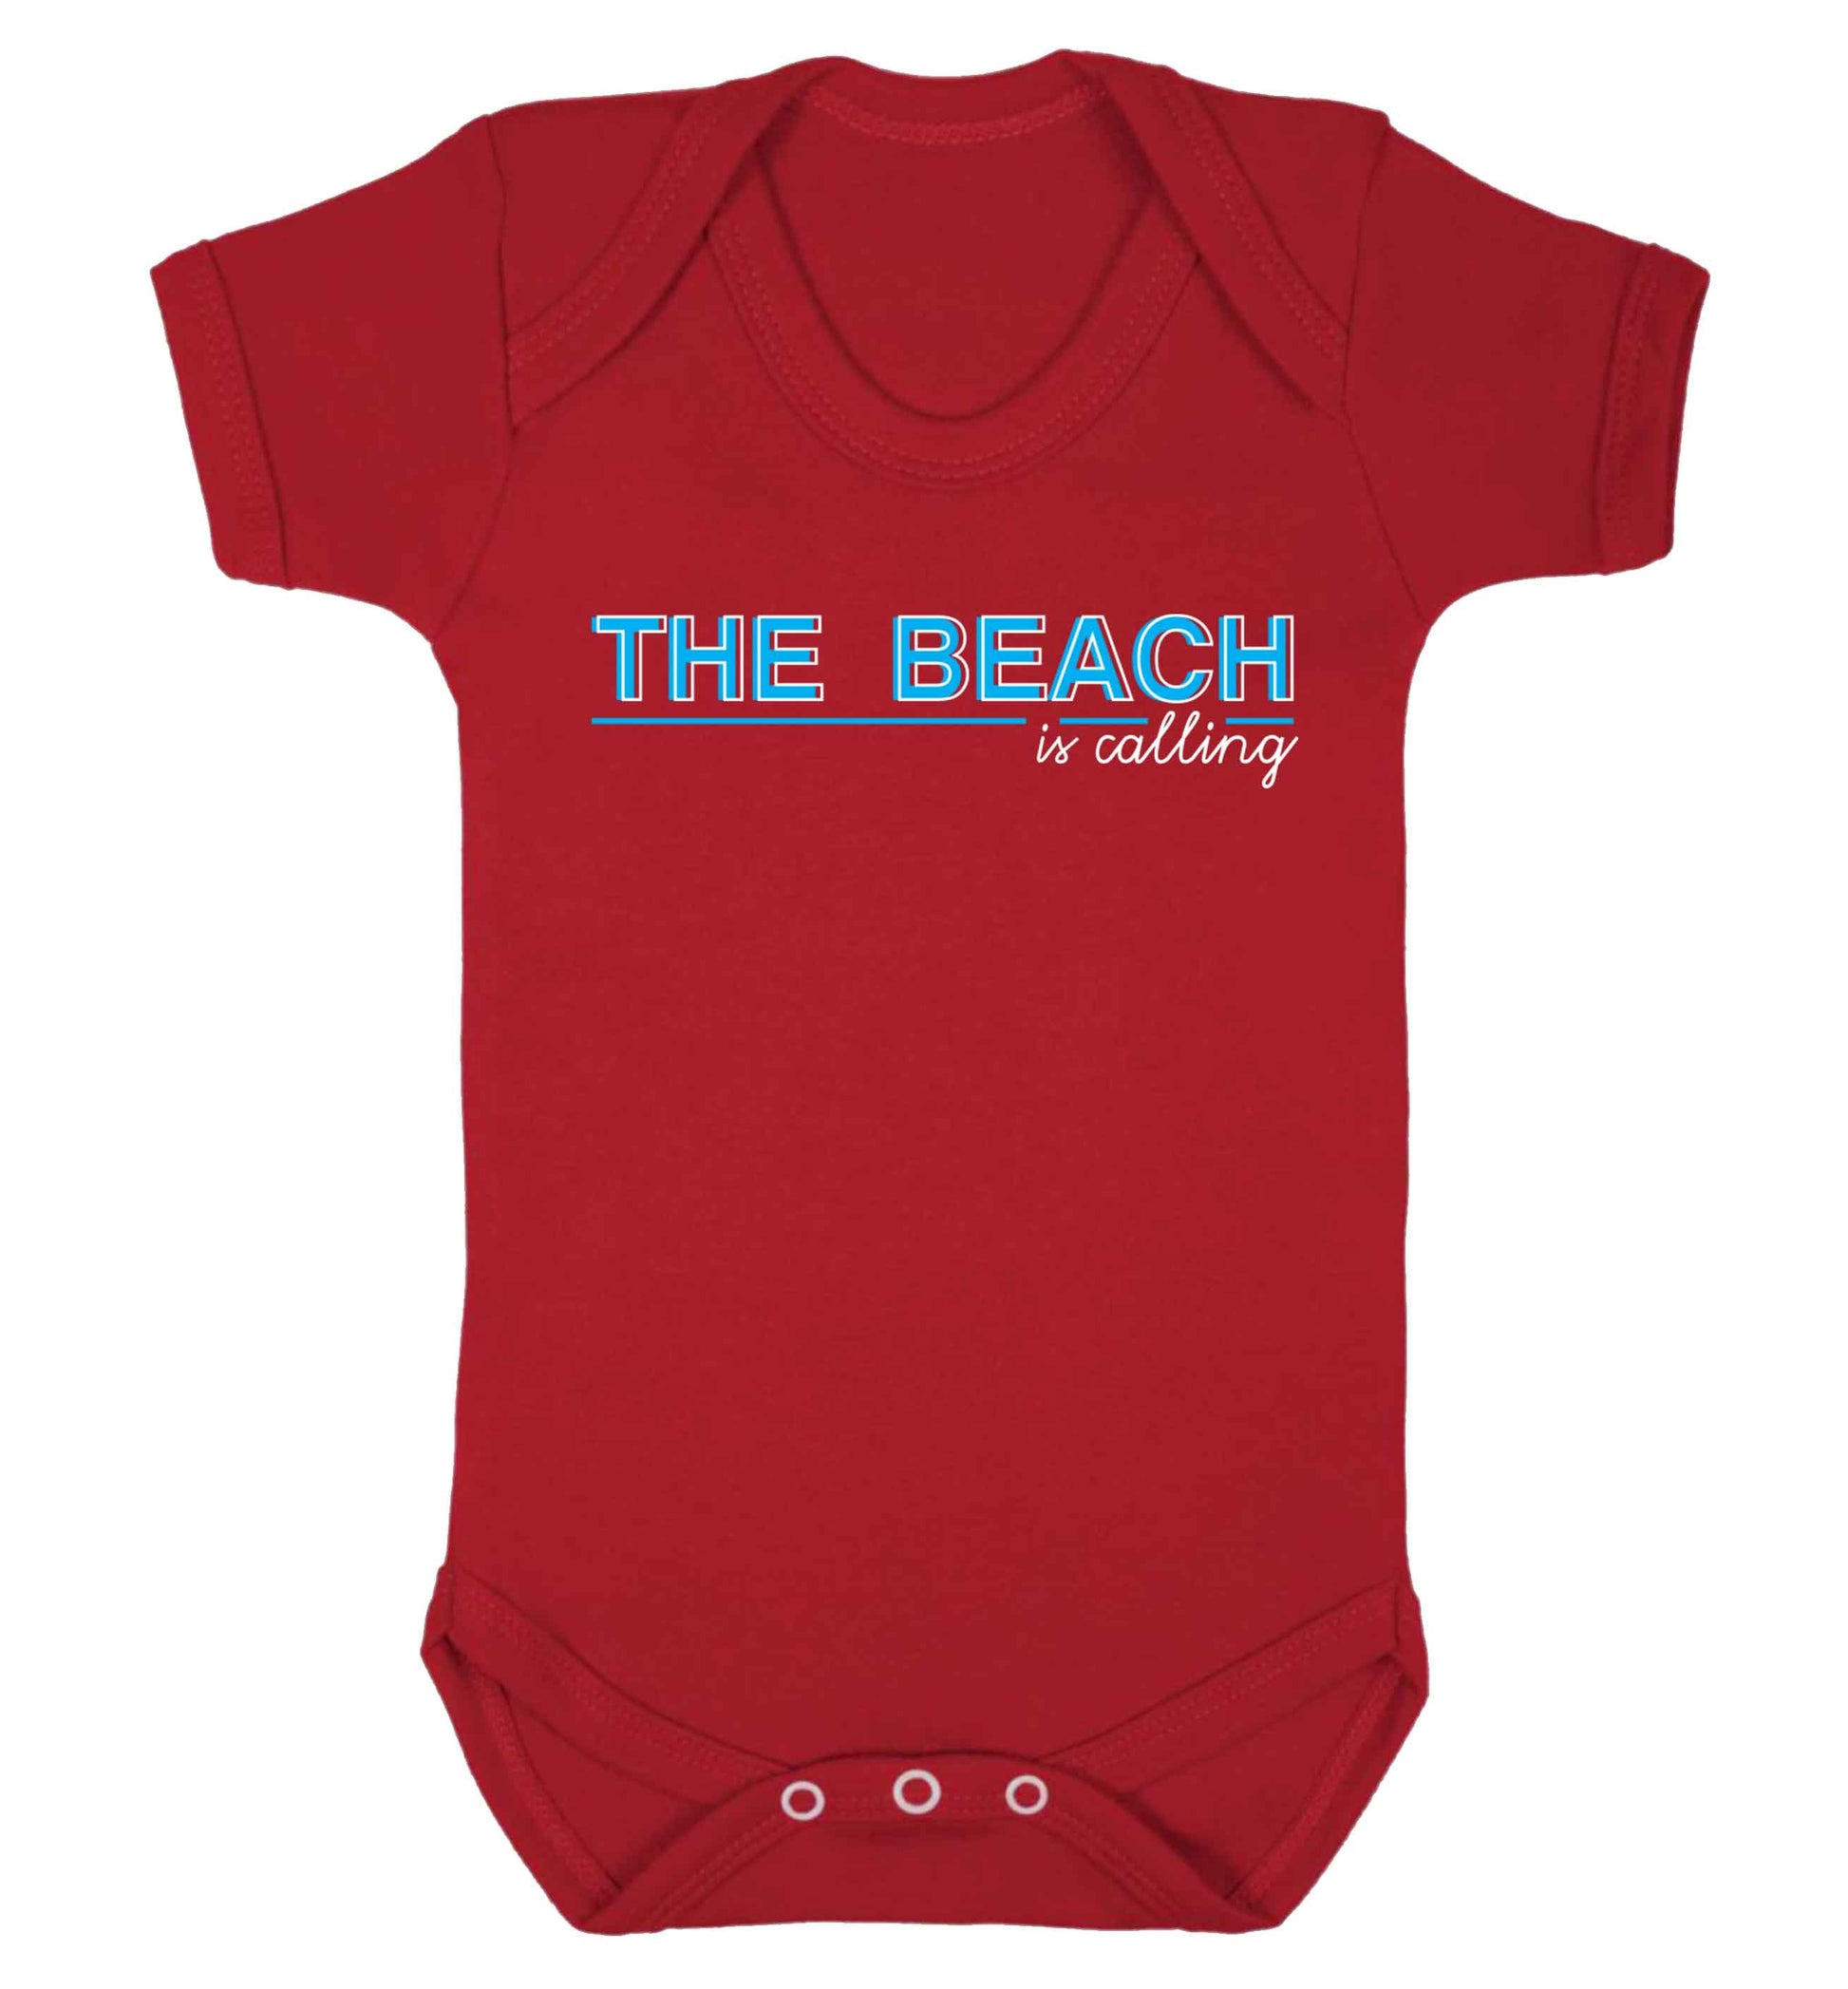 The beach is calling Baby Vest red 18-24 months